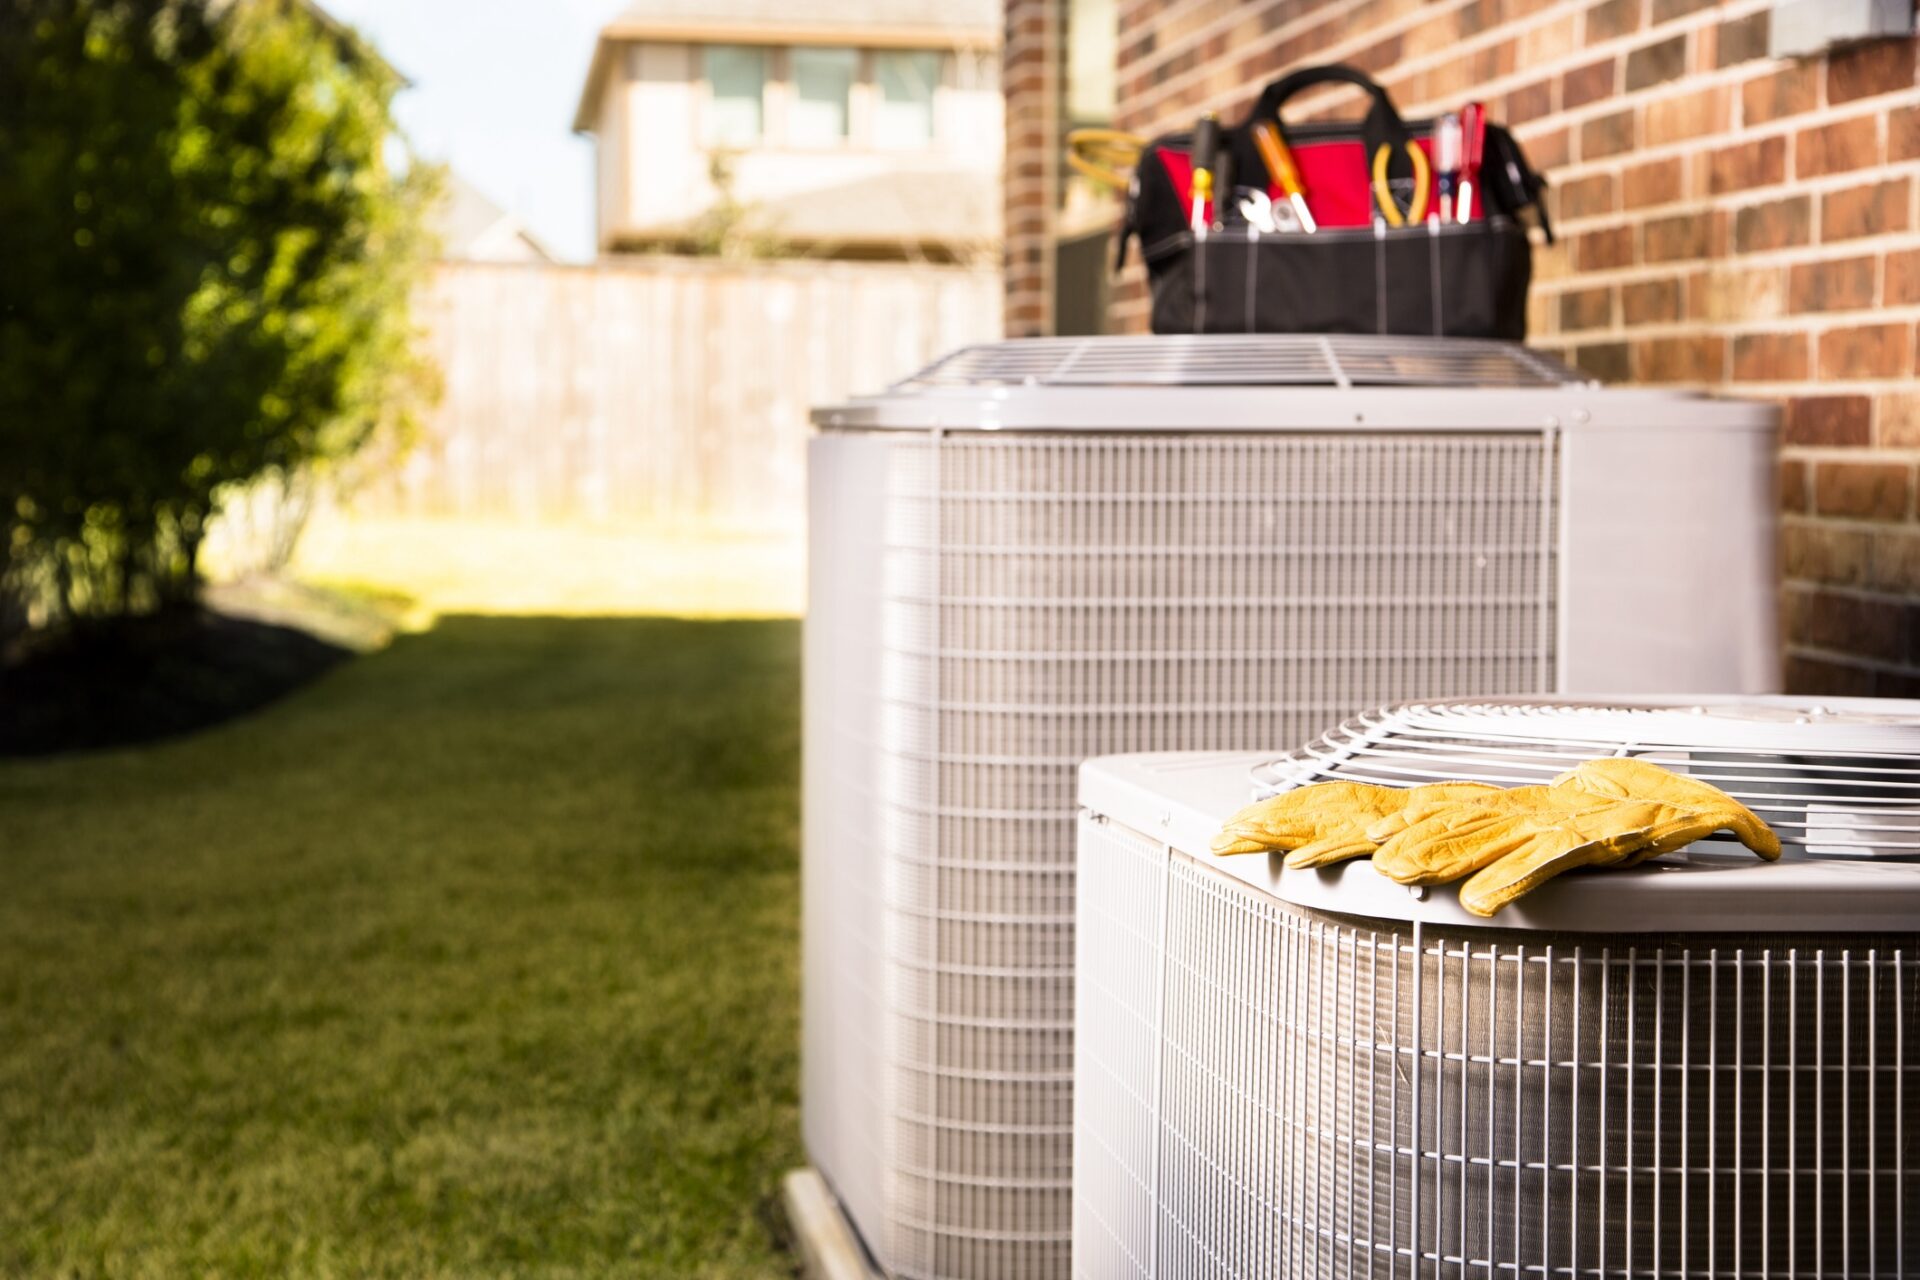 Two air conditioning units outside a house with a pair of yellow gloves on one and a tool bag in the background, suggesting maintenance work.